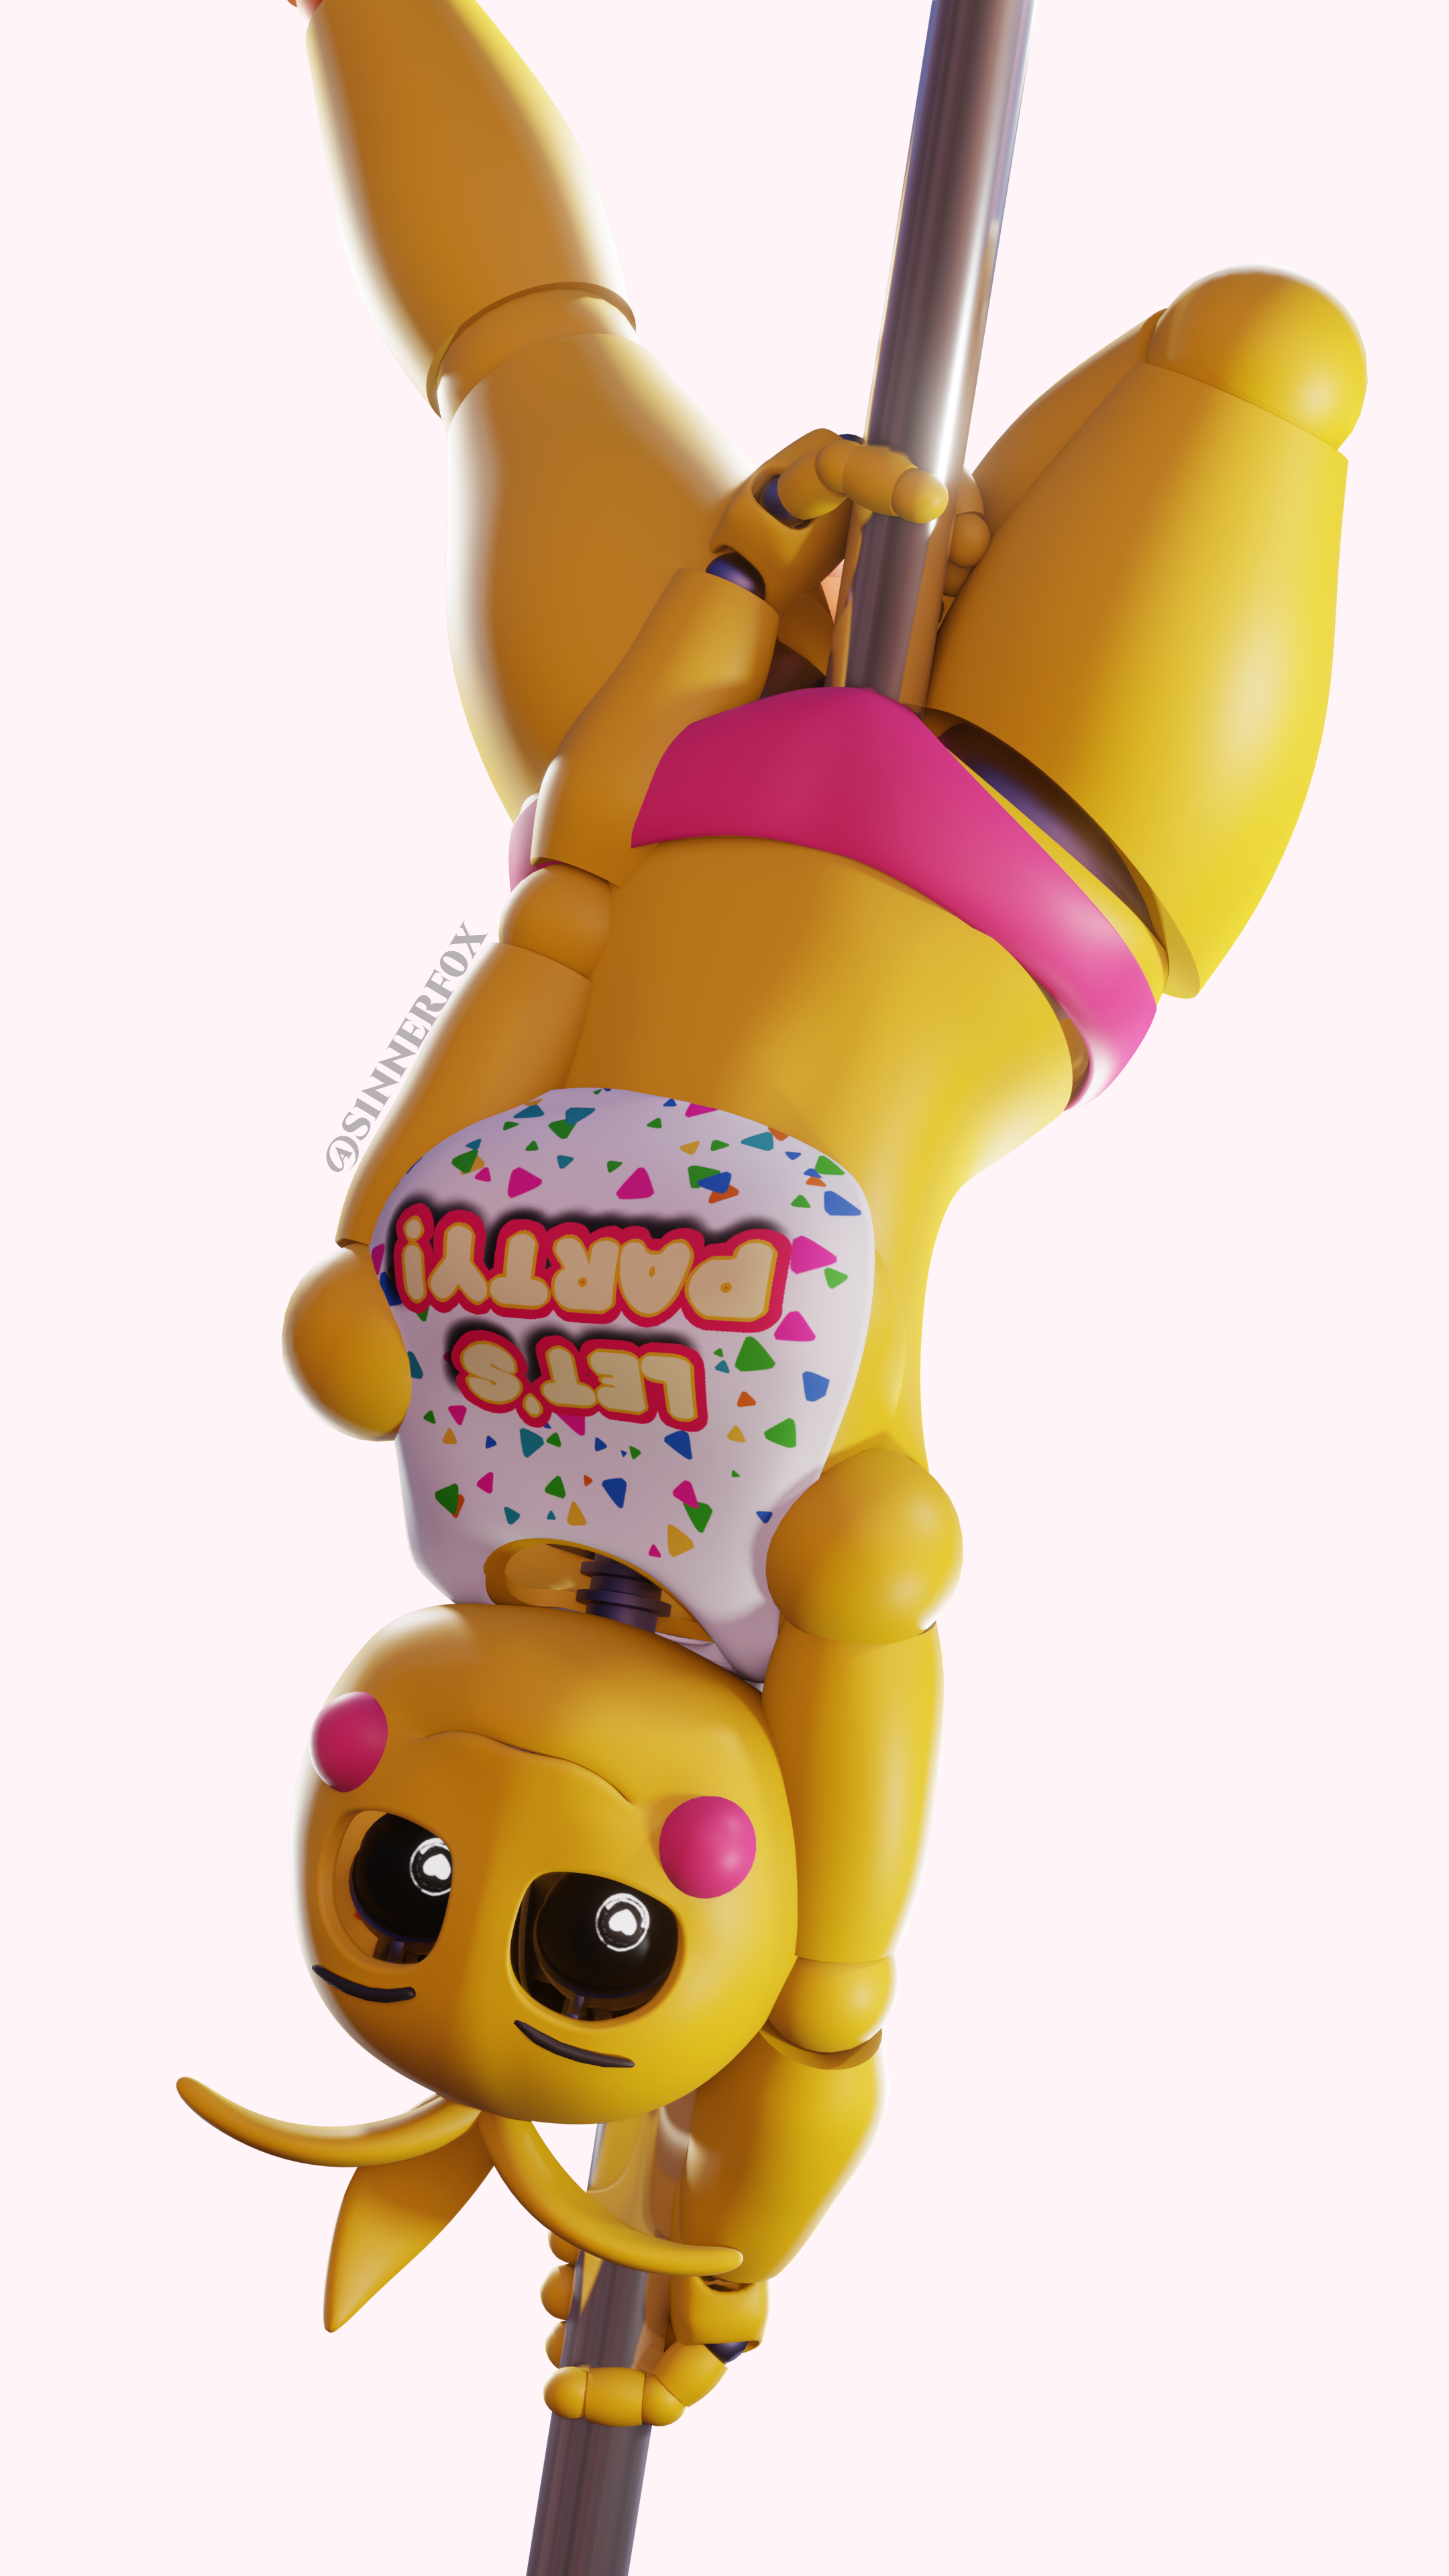 Toy chica stripping